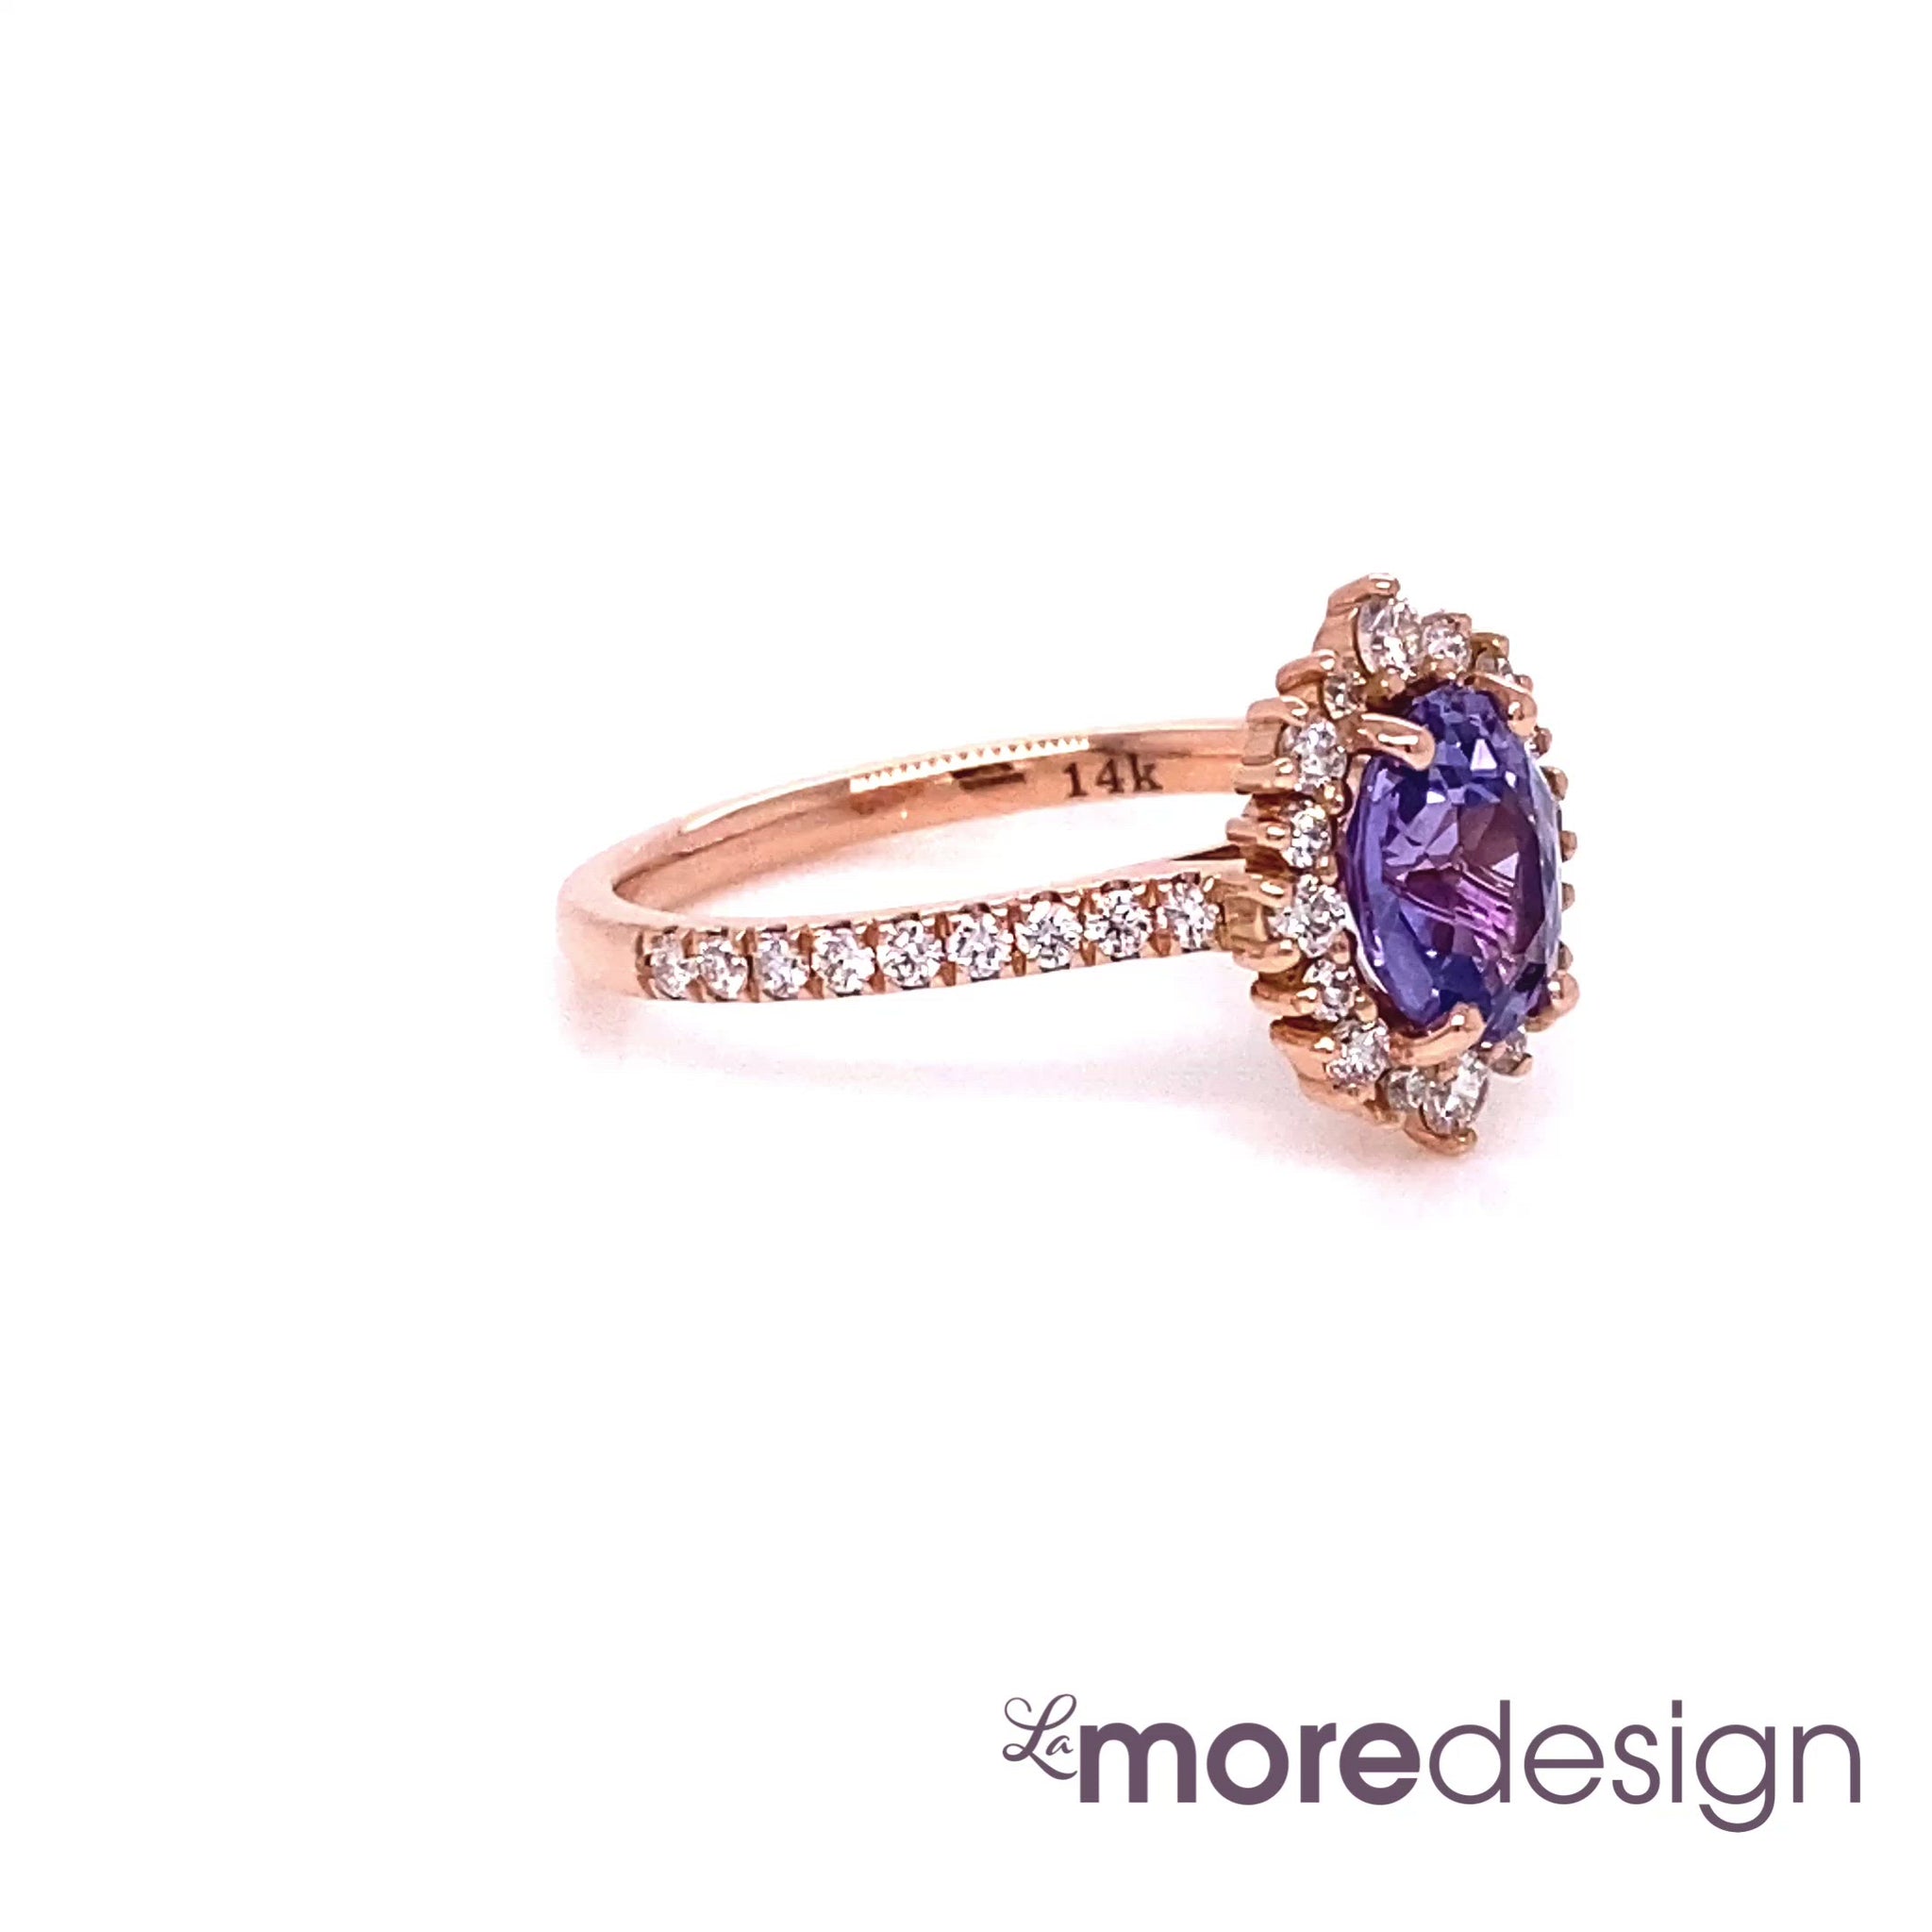 This timelessly gorgeous and unique purple sapphire engagement ring is crafted in a 14k rose gold Tiara Halo Diamond ring setting with a 1.44-carat oval cut natural sapphire center ~ the total gemstone and diamond weight of the whole ring is 1.94 ct.tw.  This one-of-a-kind sapphire ring is perfect for brides looking for non-traditional engagement rings. All our wedding bands can pair beautifully with this gorgeous halo diamond sapphire ring!